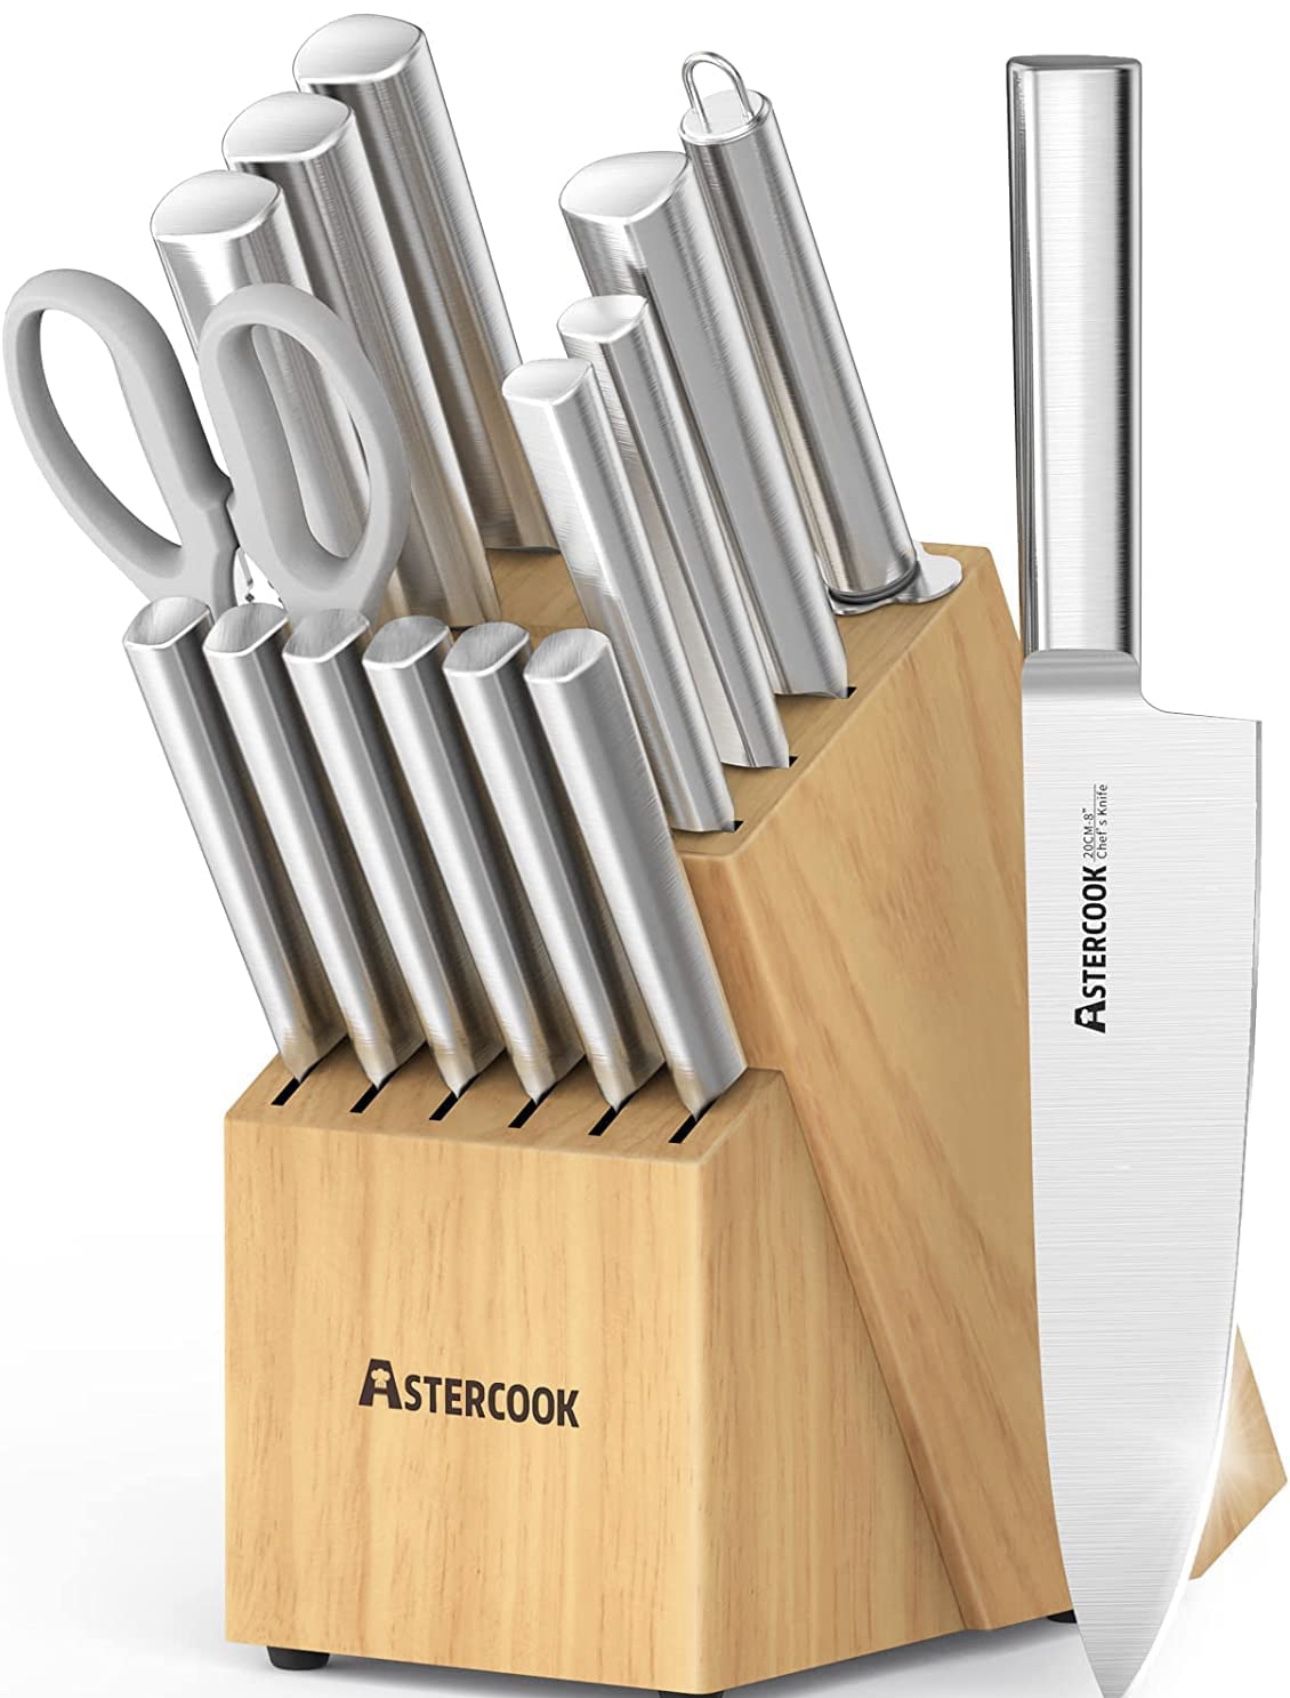 Astercook Knife Set, 15 Pieces Chef Knife Set with Block for